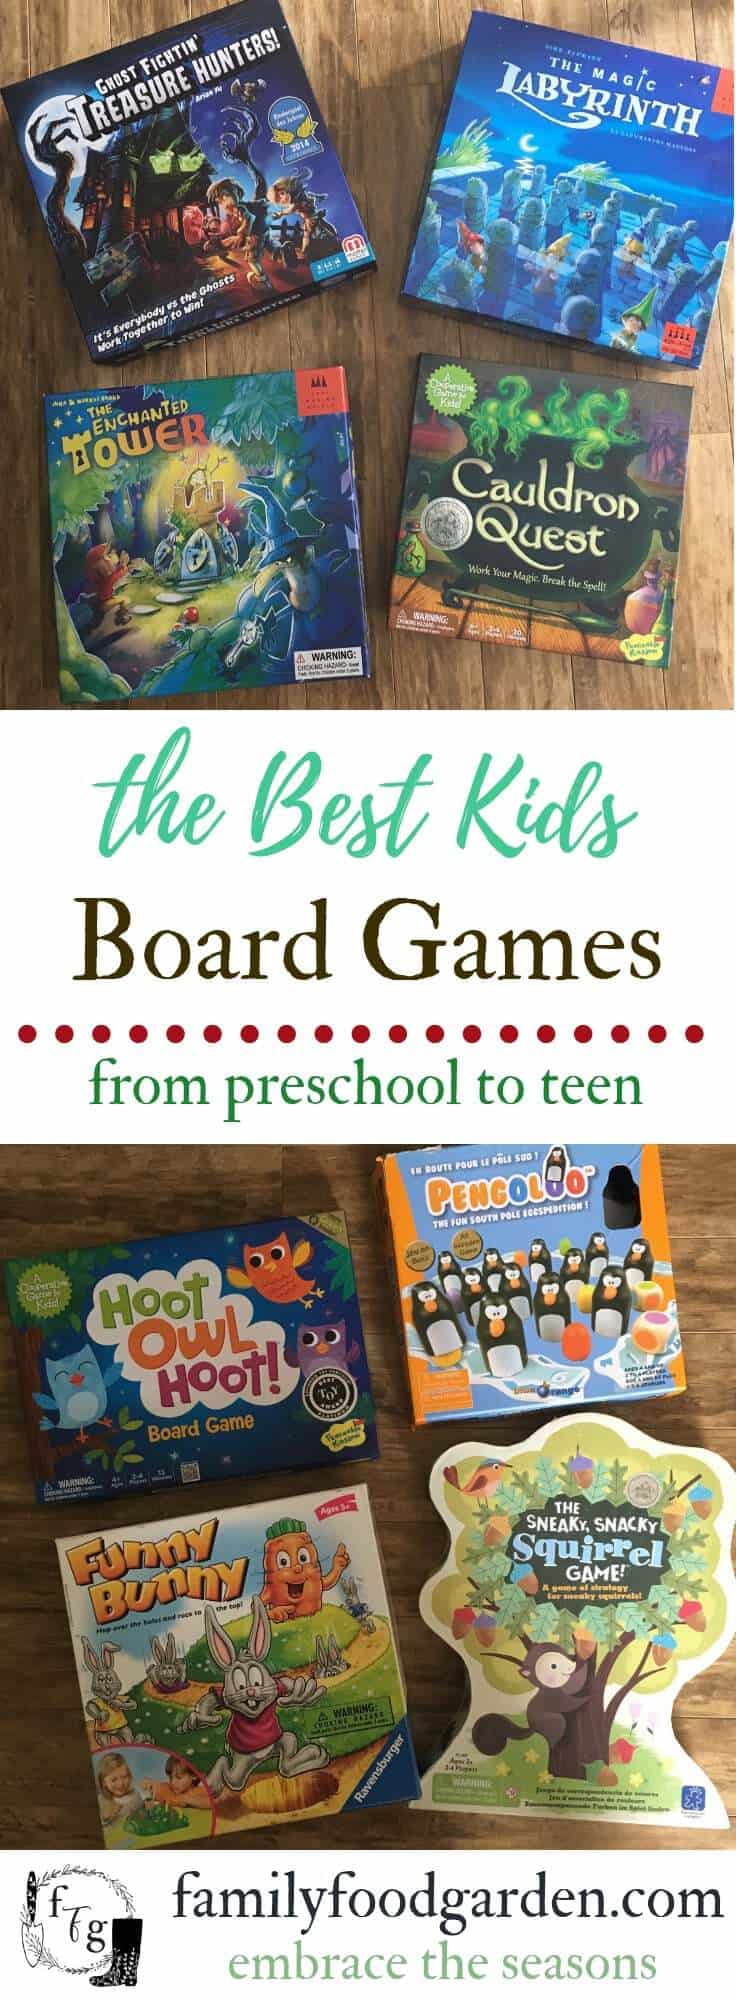 Fantastic list of board games for all ages #familygamenight #familygames #giftsforkids #kdisgifts #kidsboardgames #boardgames #toddlergames #preschoolgames